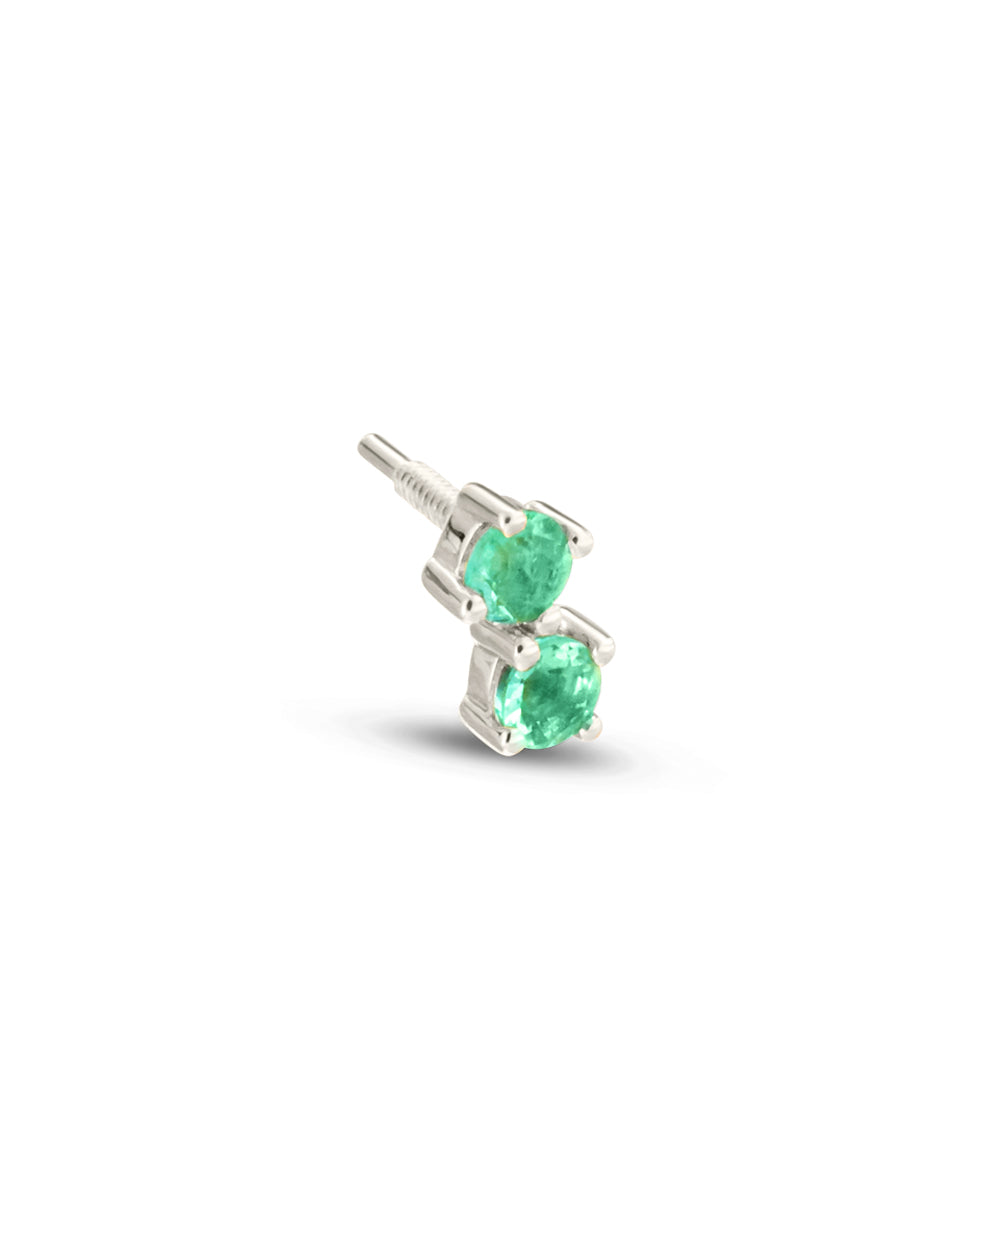 Covetear Emerald Petit Duo Cartilage Earring#material_14k_White_Gold